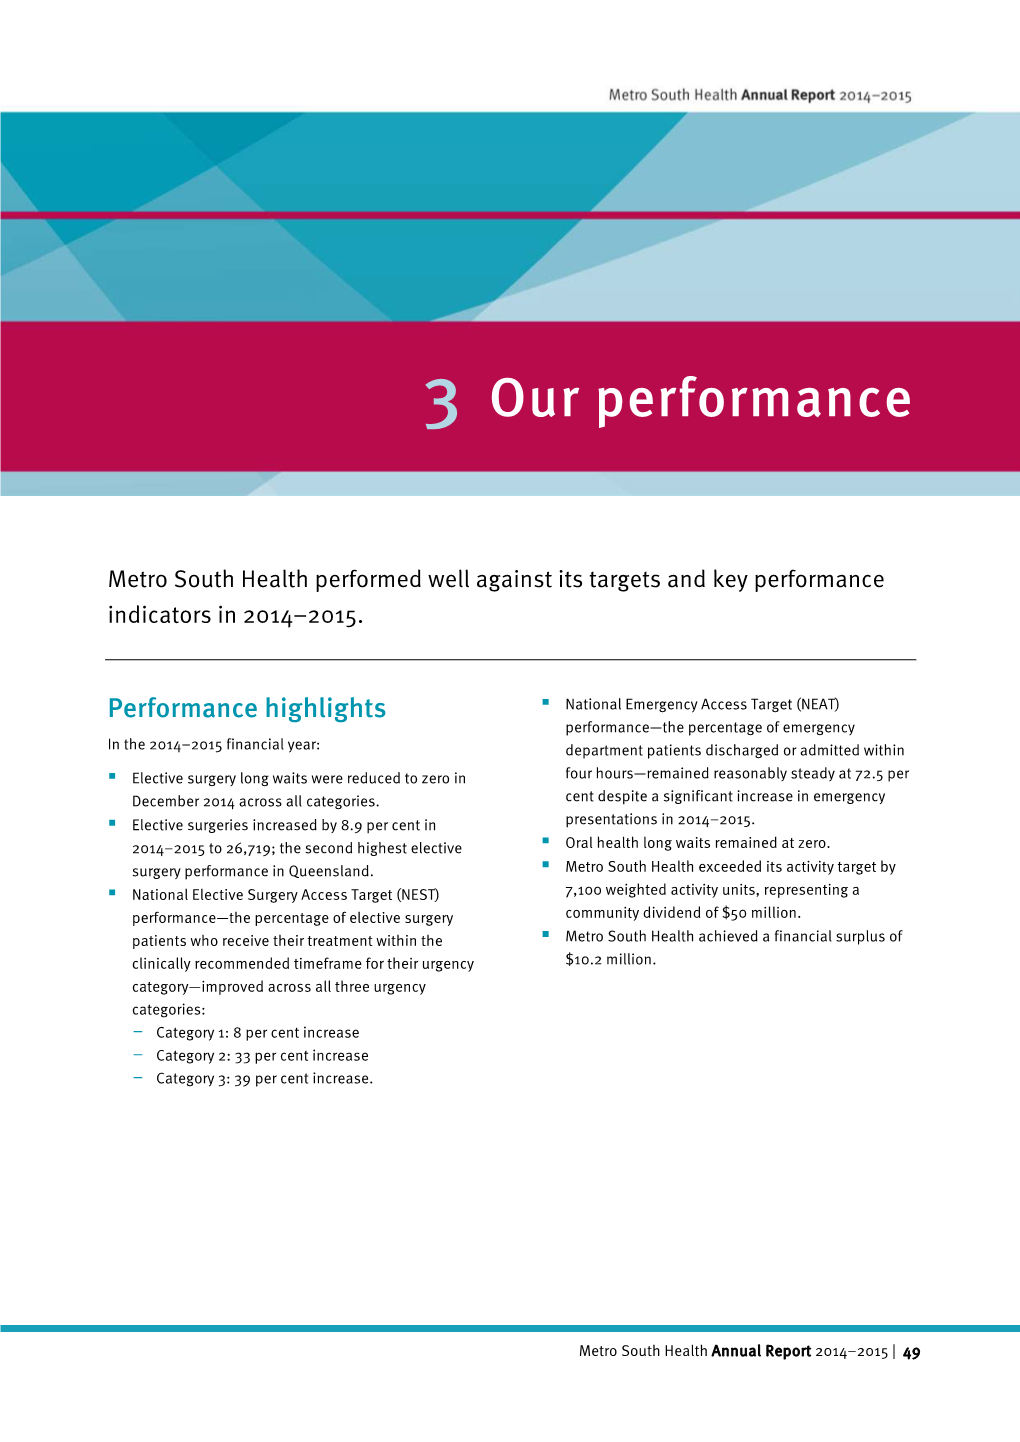 Part 4 of 7—Metro South Hospital and Health Service Annual Report 2014-2015